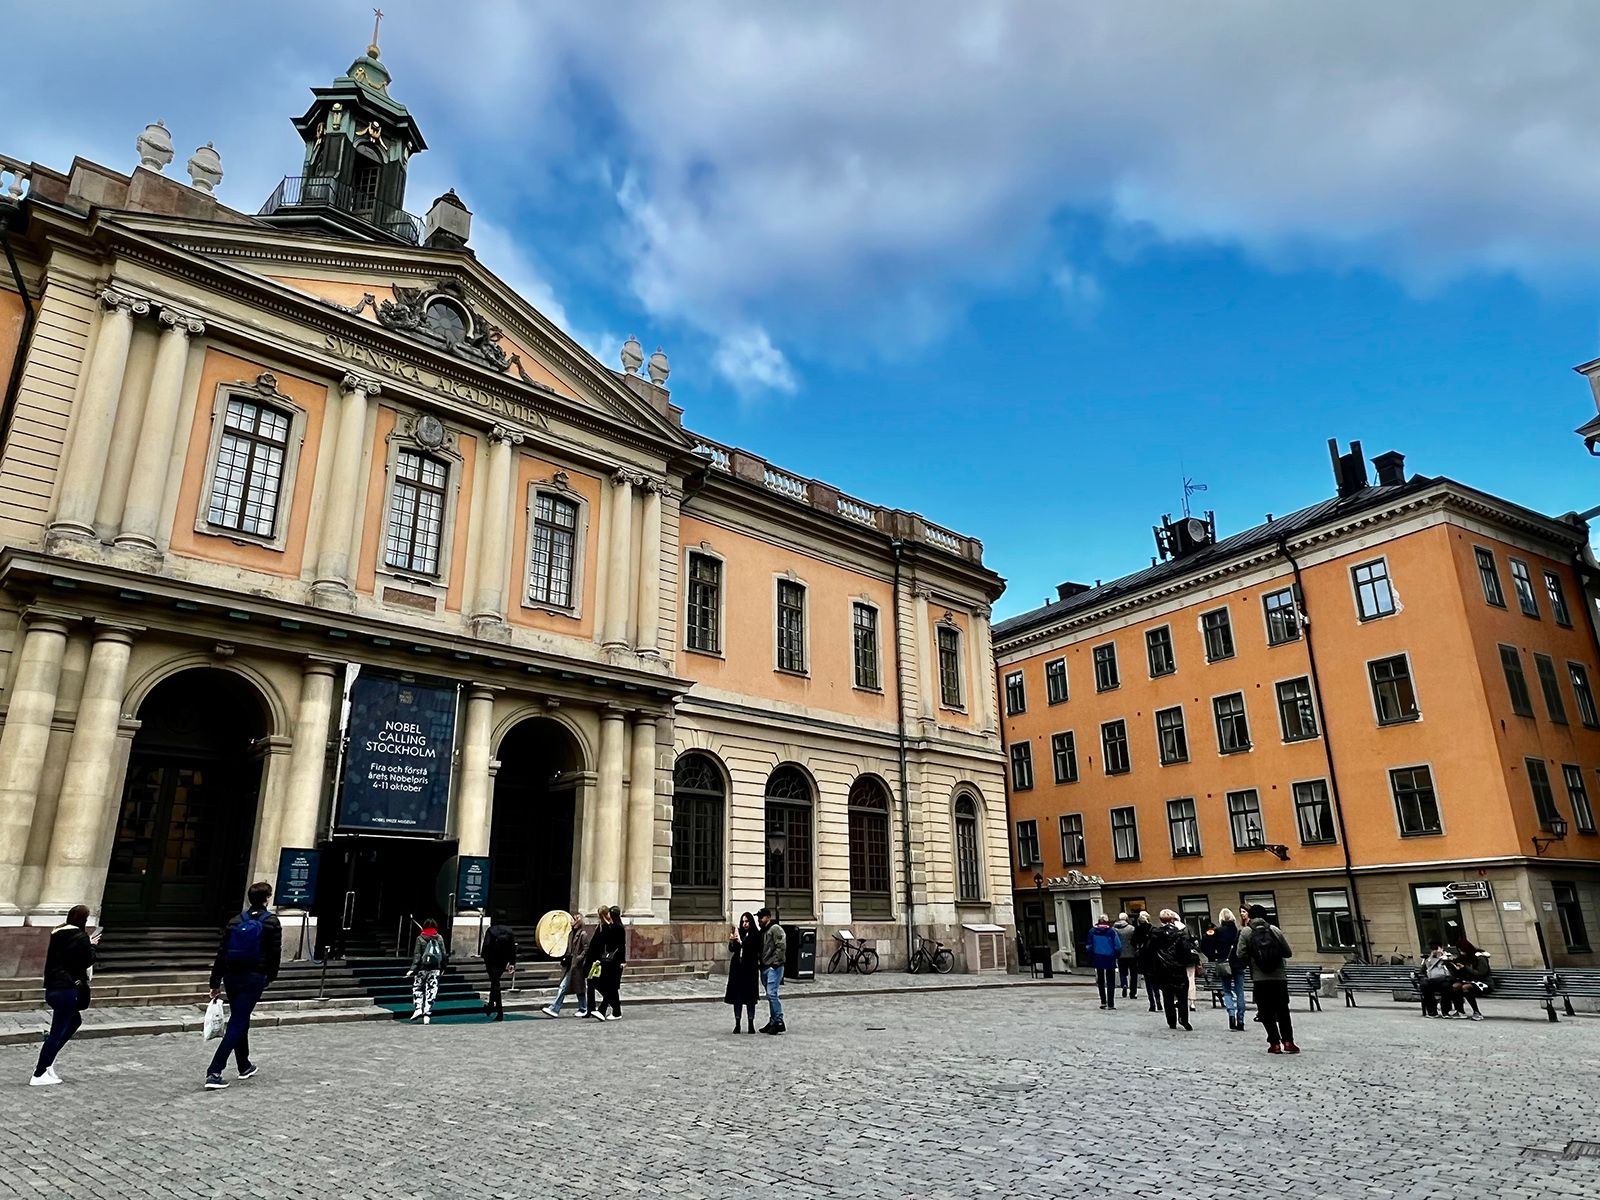 External view of the Nobel Prize Museum in Stockholm, Sweden